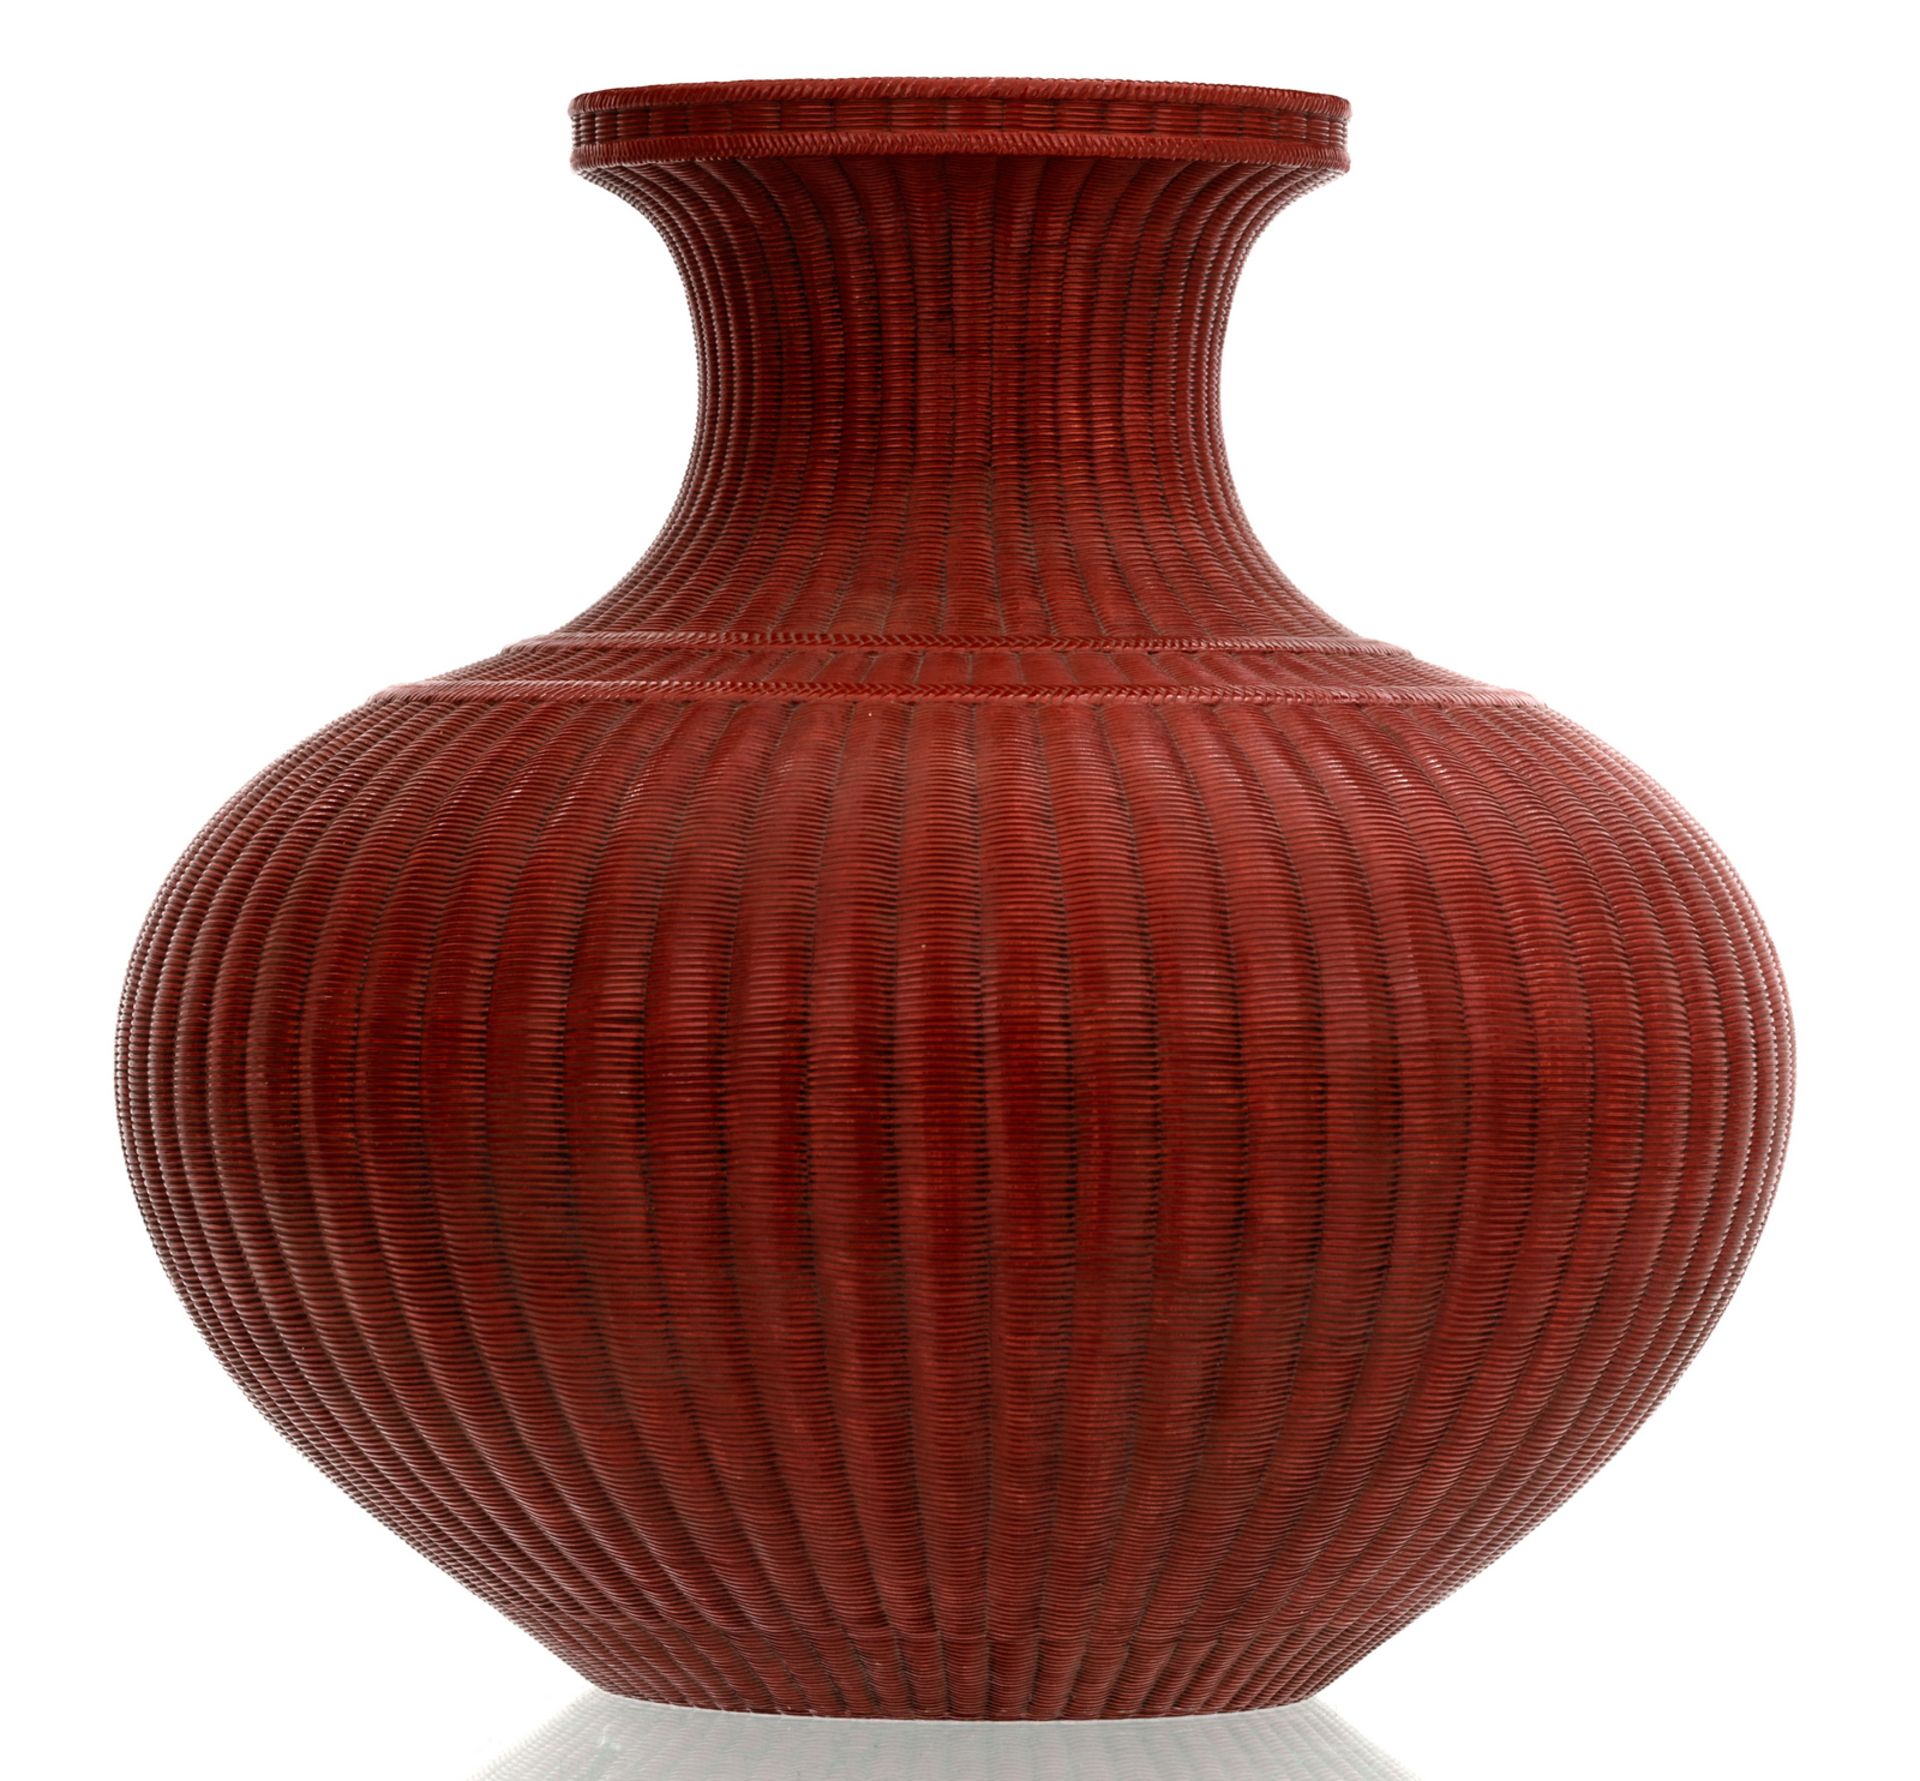 A fine Chinese red brown glazed reed basket shaped vase with a Yongzheng mark, H 40,5 cm - Image 4 of 7